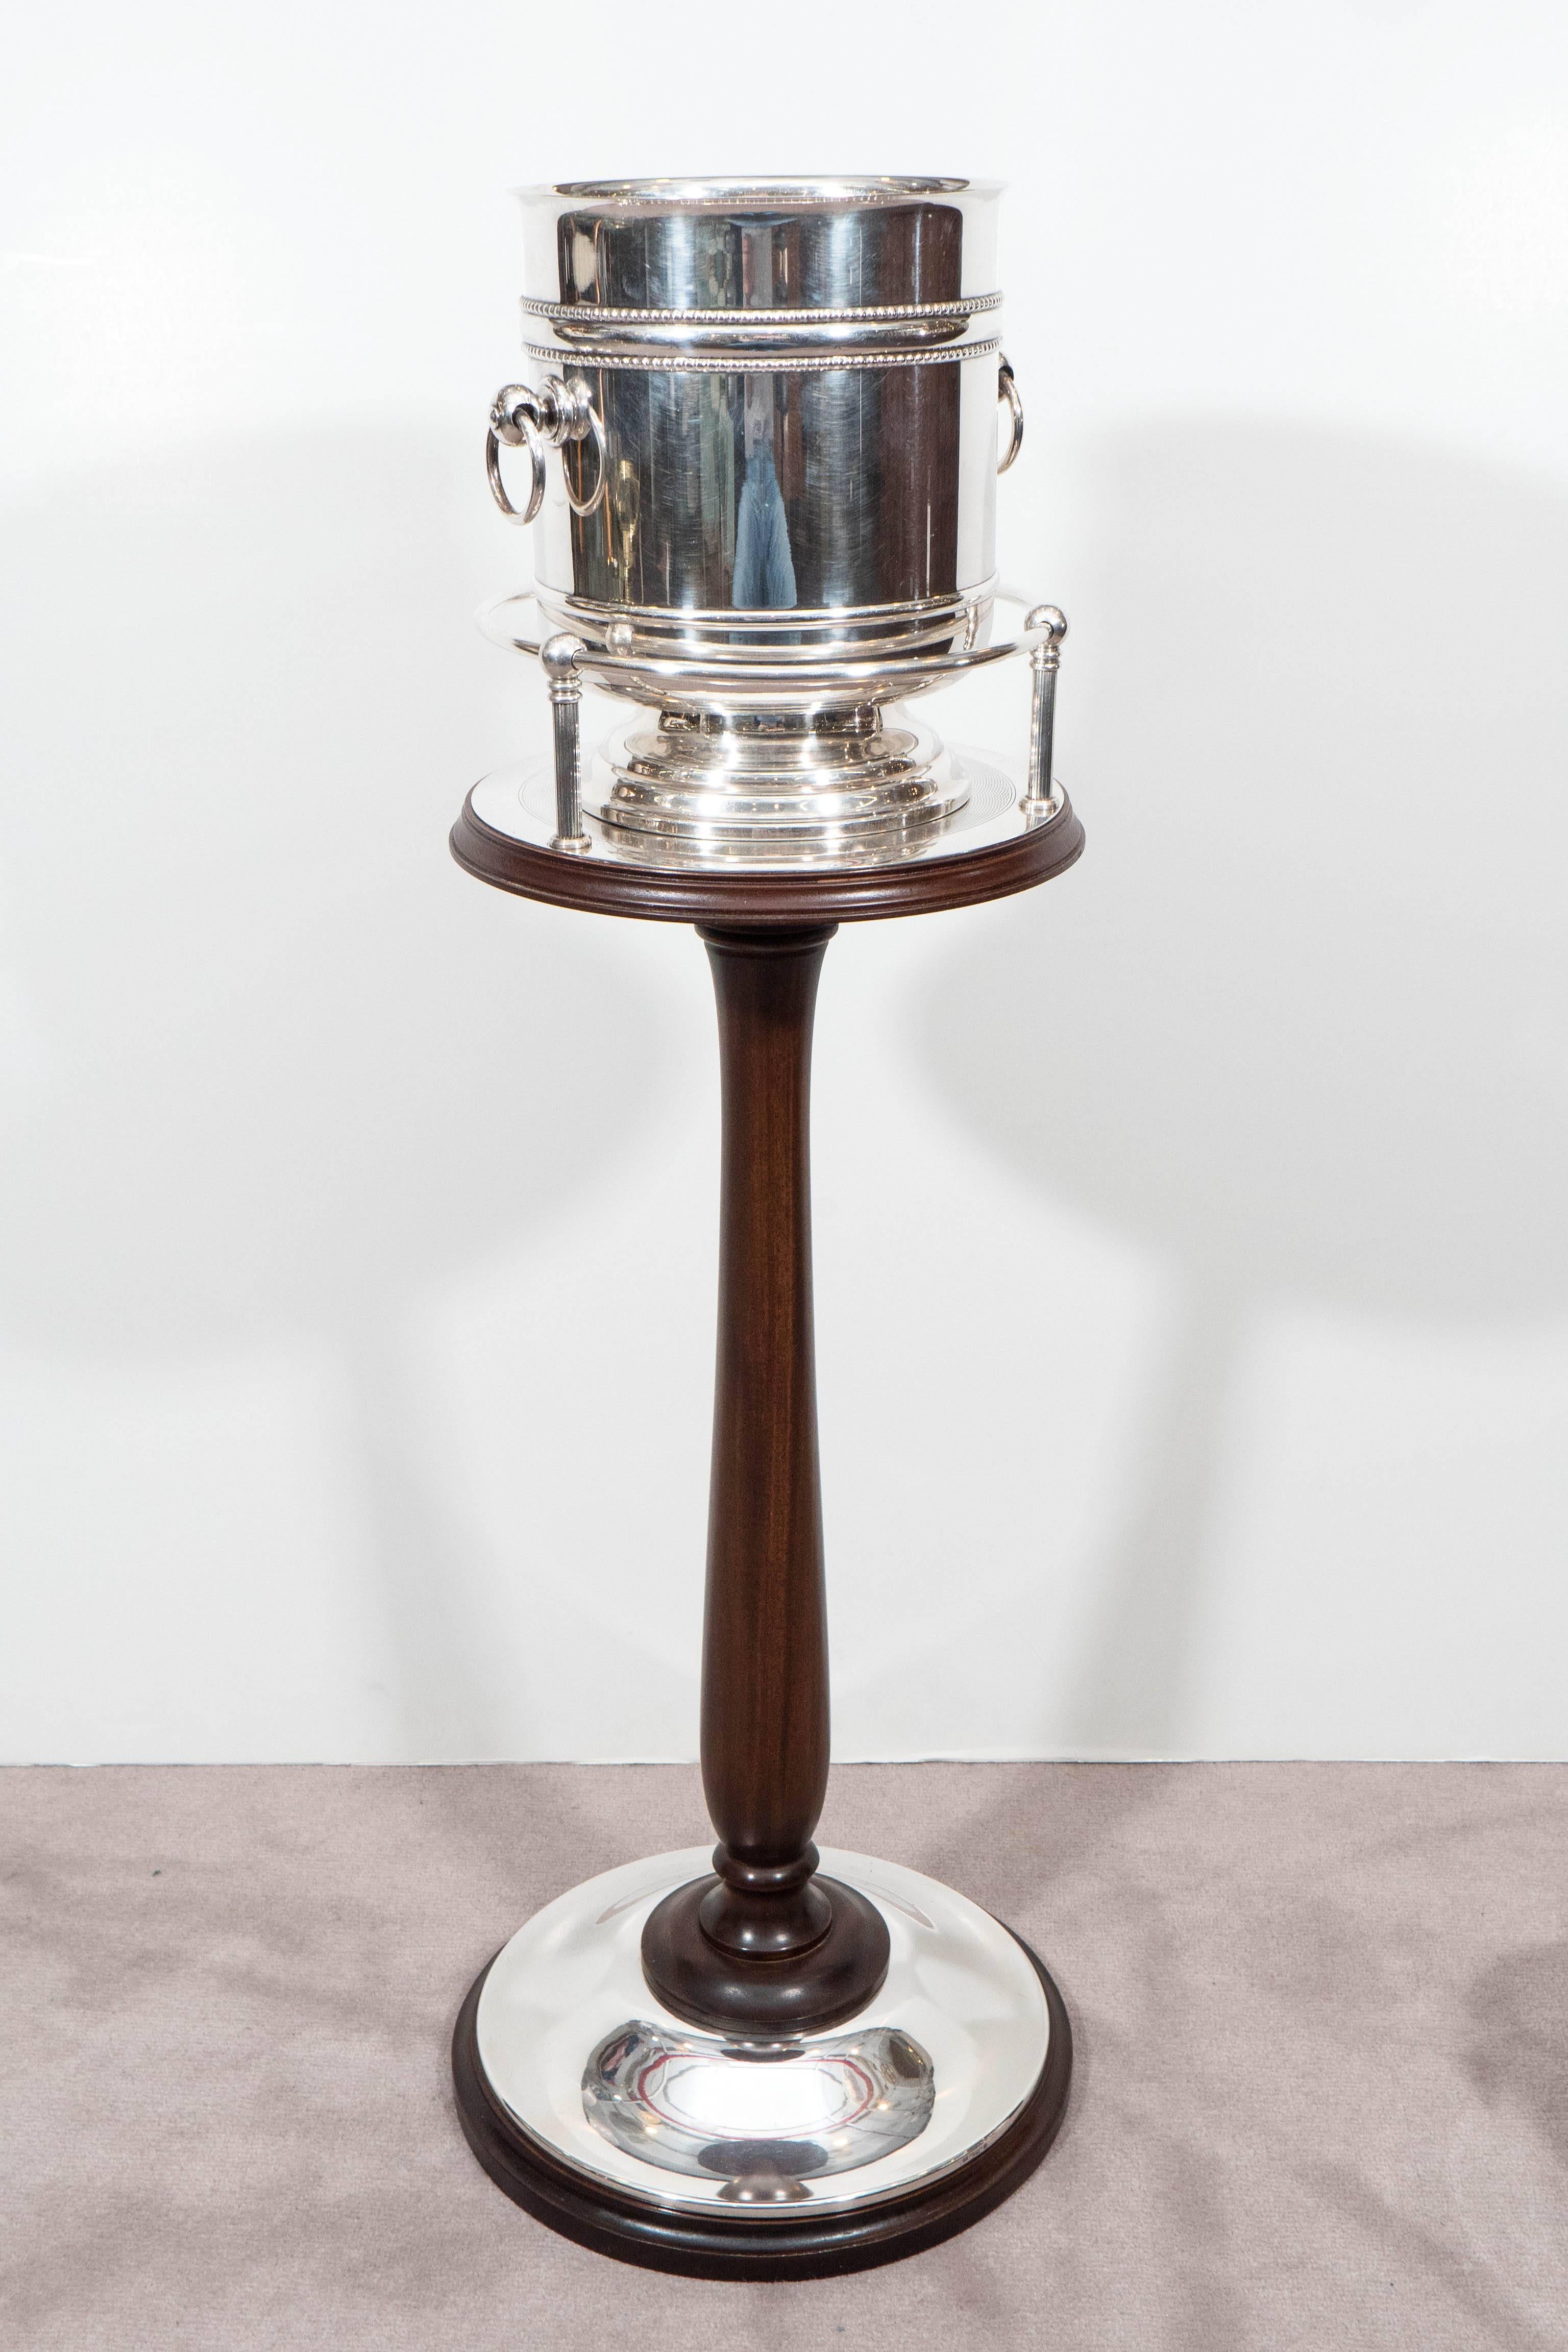 Very rare Art Deco champagne buckets in silver plate, each with ring handles on stepped pedestal bases, produced circa 1930s by Christofle, on mahogany stand, which features a silver plate top with circular gallery, over a turned, baluster form stem